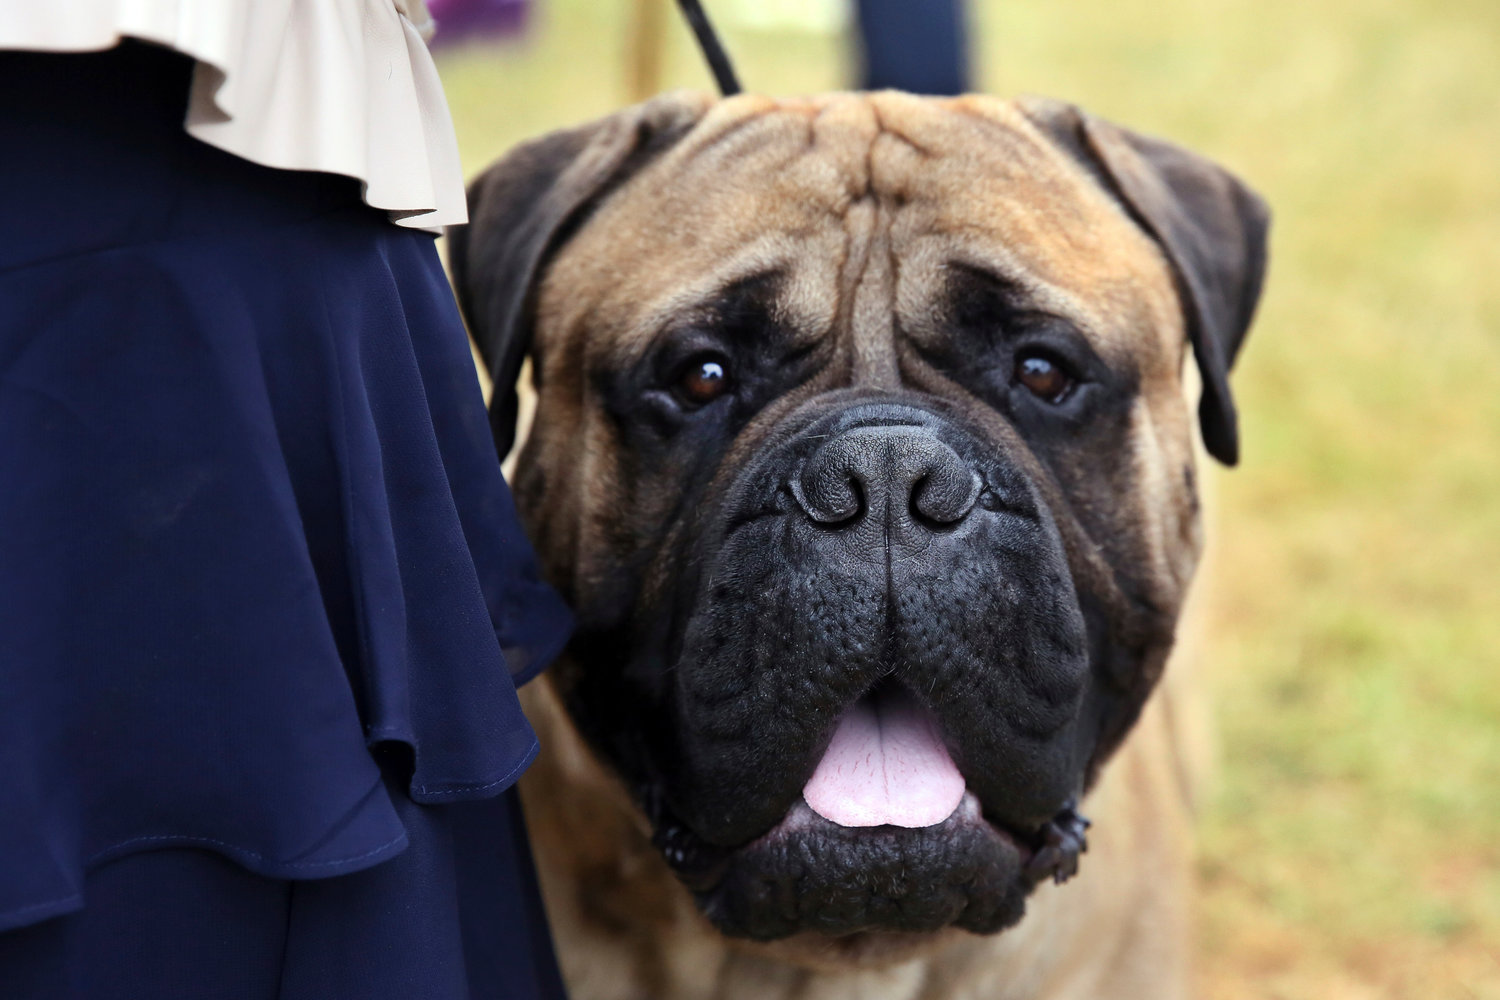 Otis, a bullmastiff, relaxes after competing at the Westminster Kennel Club Dog Show, Wednesday, June 22, in Tarrytown, N.Y. (AP Photo/Jennifer Peltz)